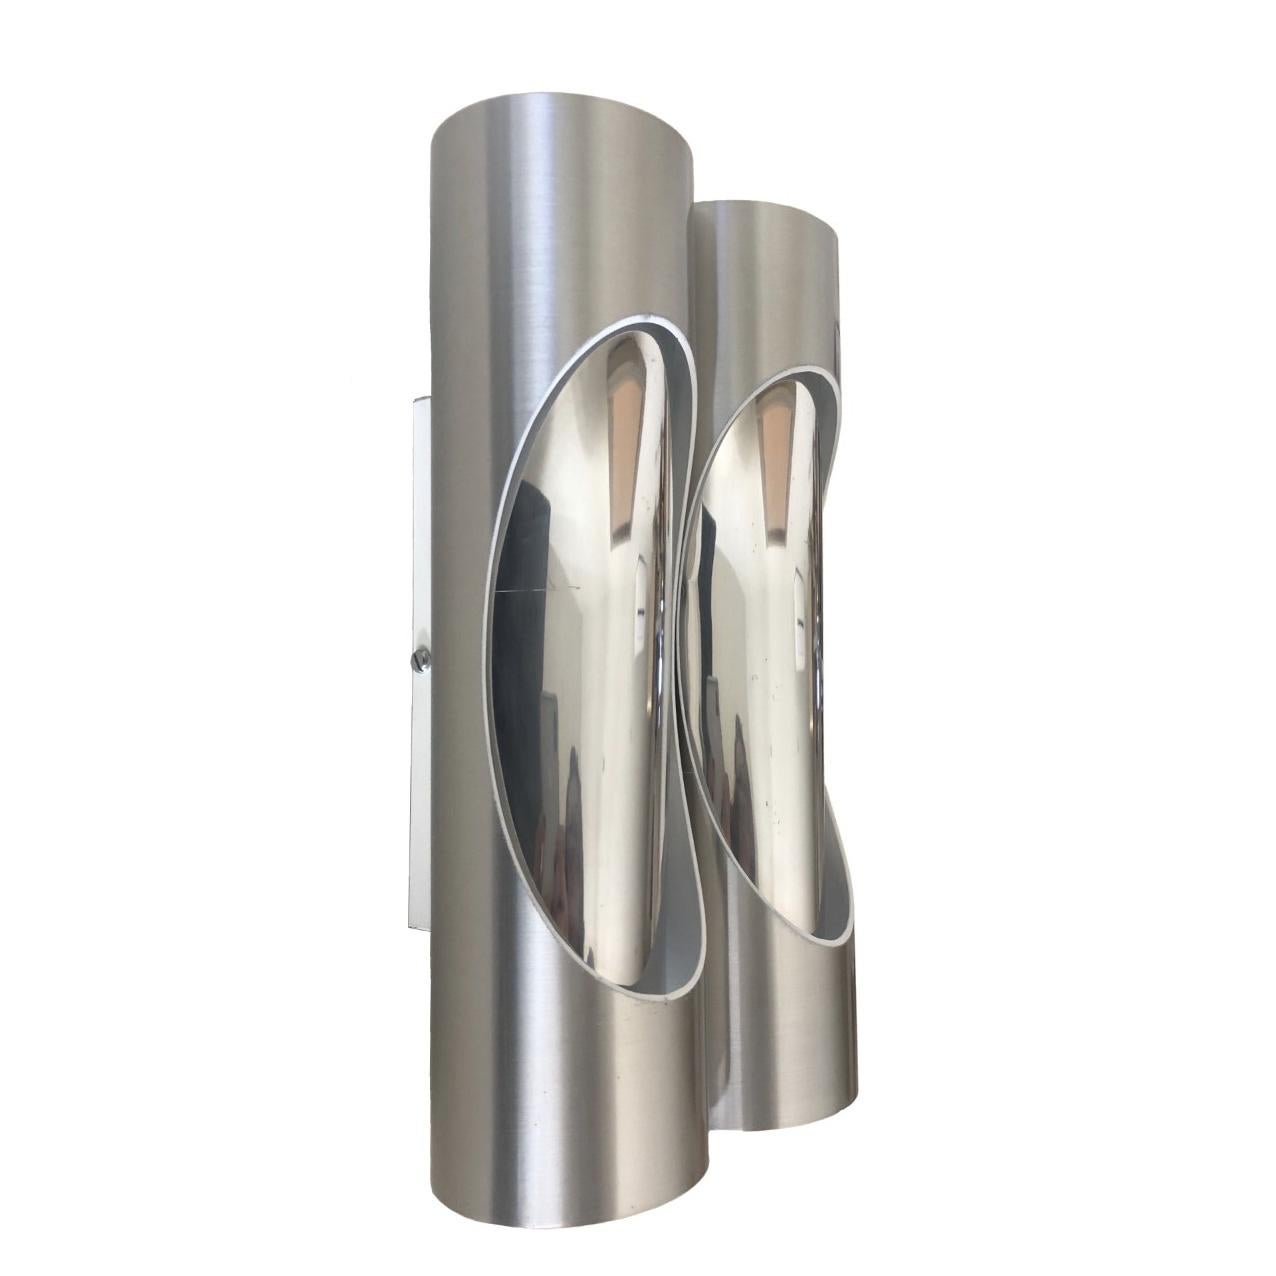 Stunning and beautiful pair of mid century silver tubular double Spanish wall sconces. These wall sconces are made in Barcelona (Spain) by Marca, S.L., during 1980s.
Each wall sconce is equipped with 4 light sockets (E27). A professional